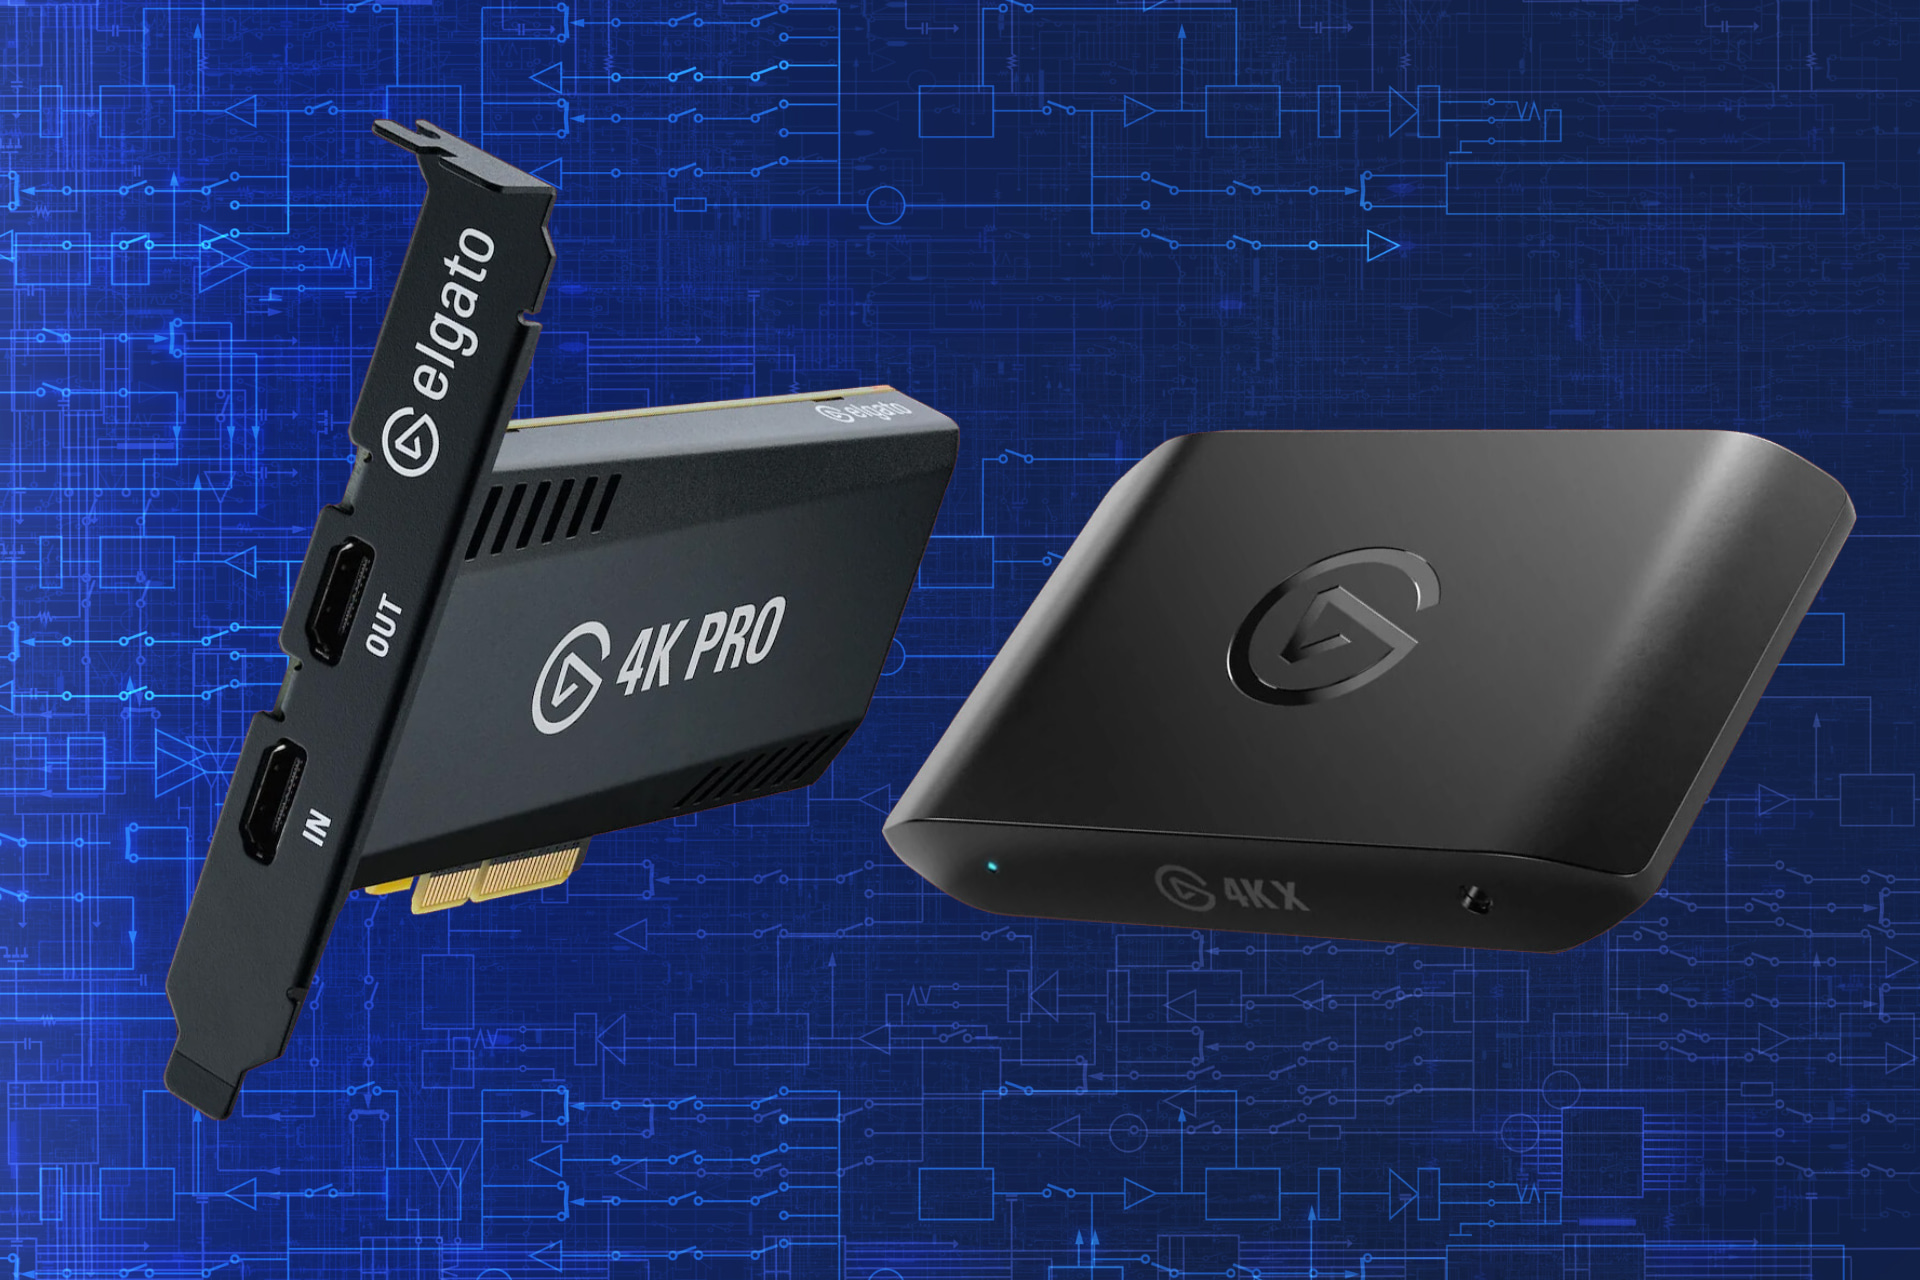 Elgato Capture Cards 4K X and 4K Pro featured together